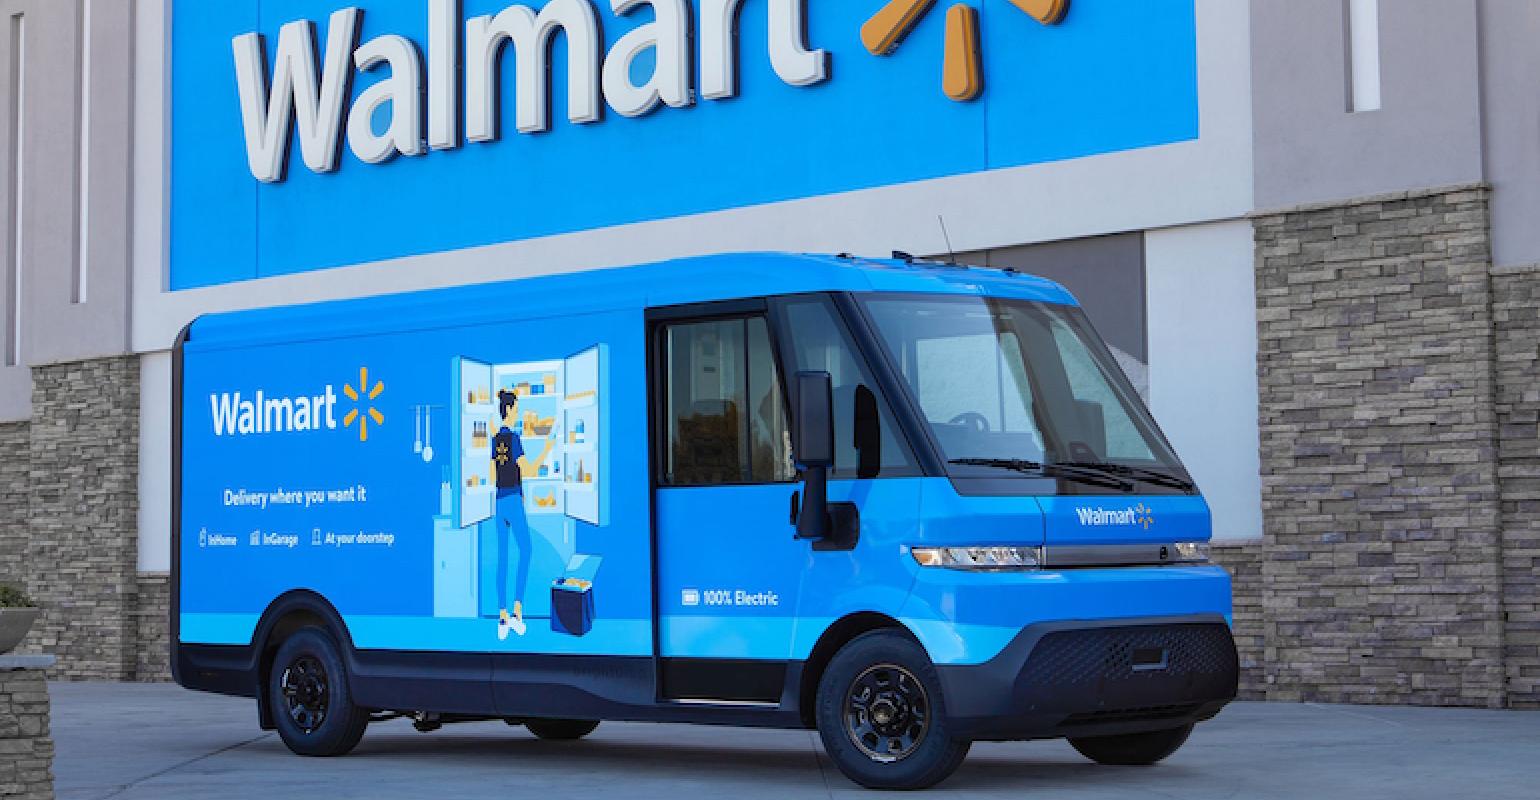 Las Vegas Walmart shoppers among 1st to try next-day shipping